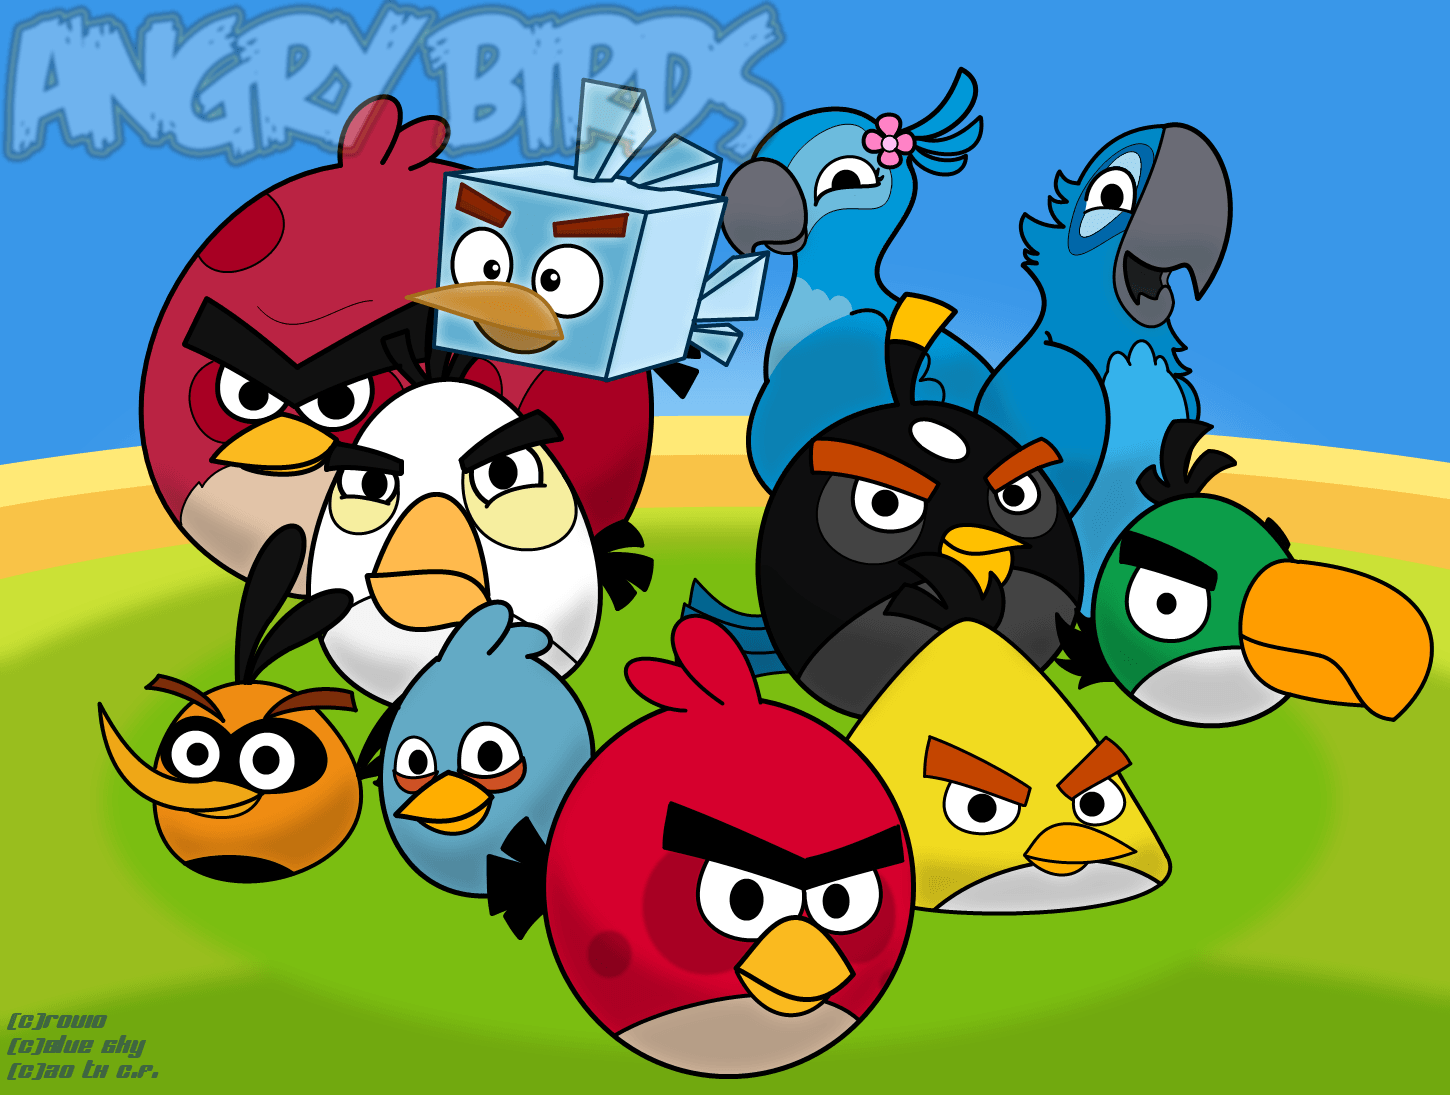 Angry Birds Wallpaper V2 By Olocoonstito D4slmoz.png. Angry